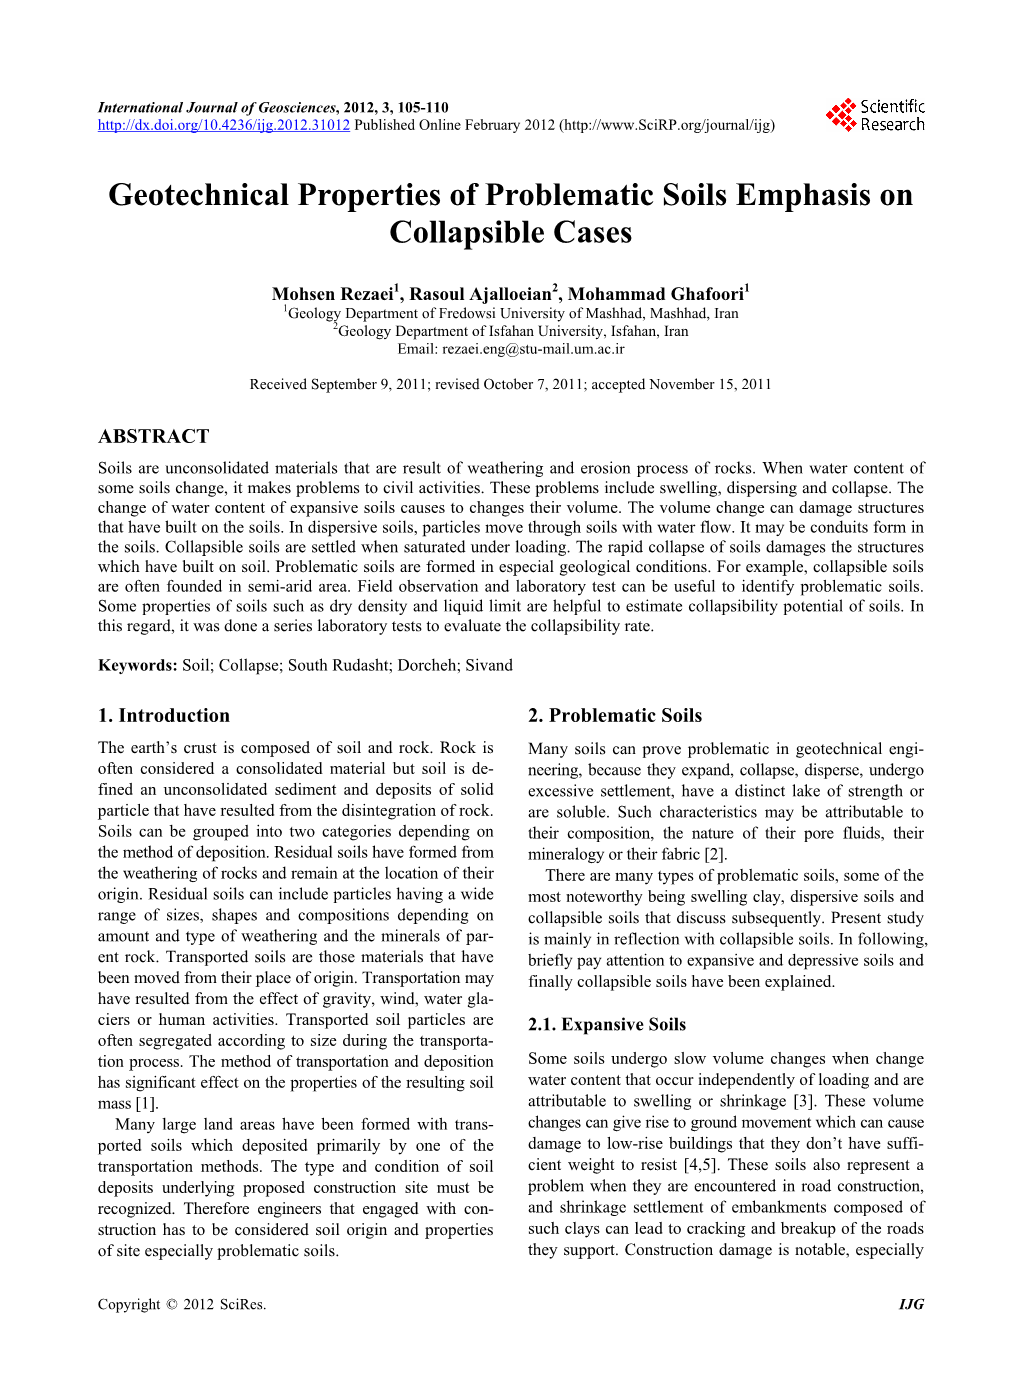 Geotechnical Properties of Problematic Soils Emphasis on Collapsible Cases